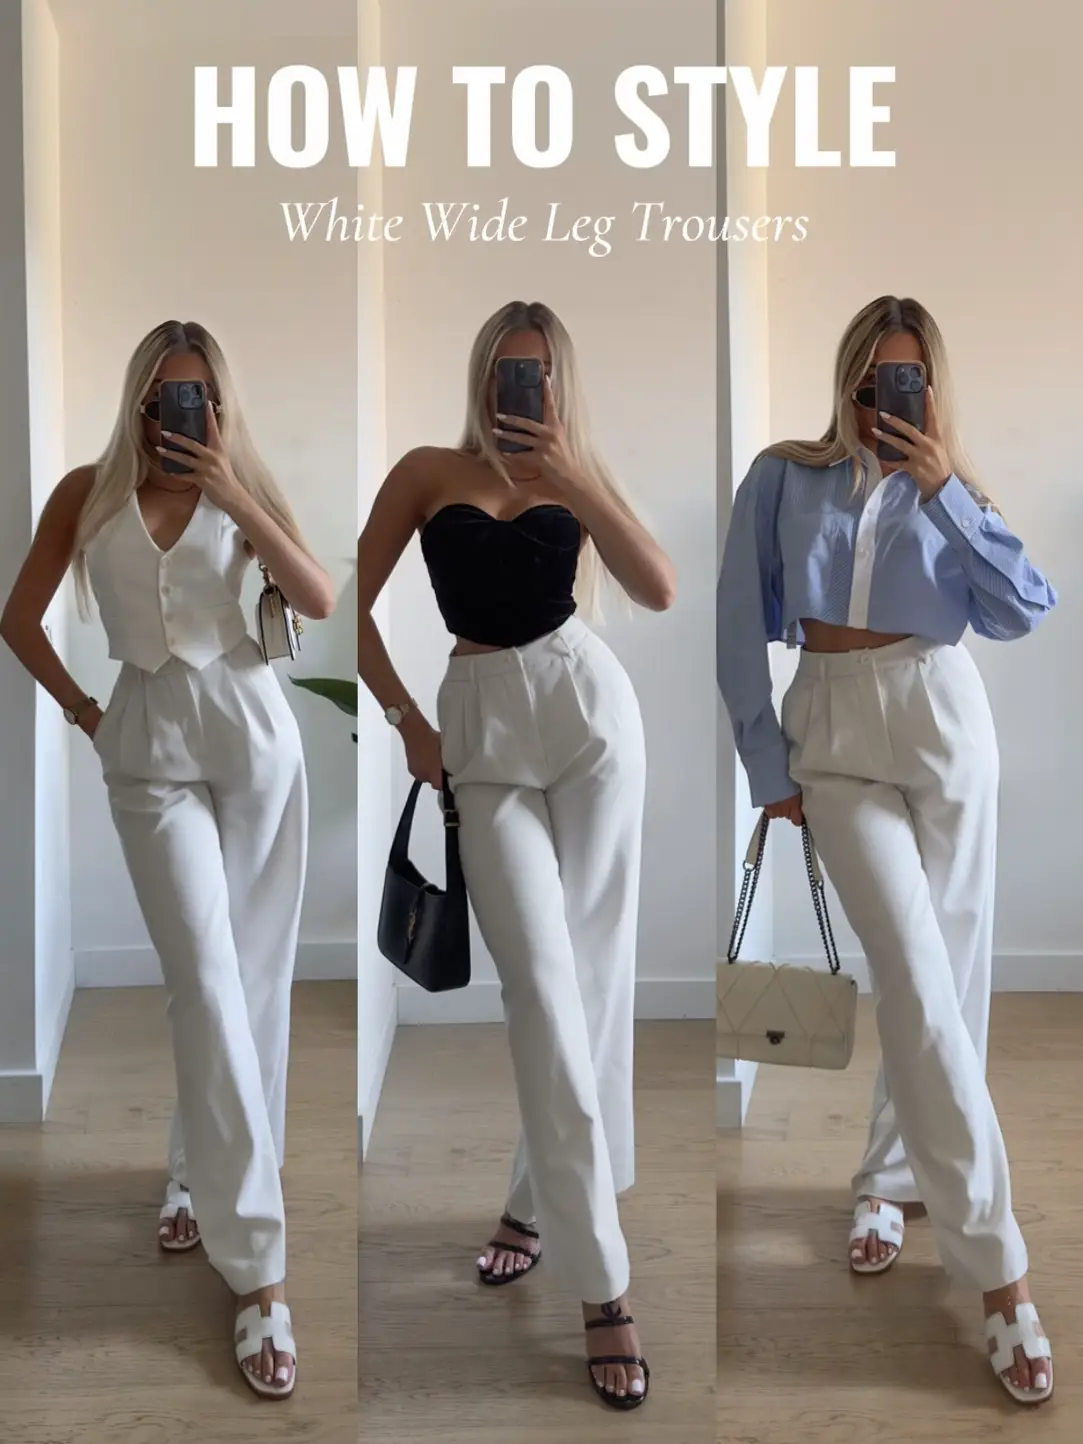 Clever Lady - 👉Types of Pants  Women's Trousers Styles & Trends